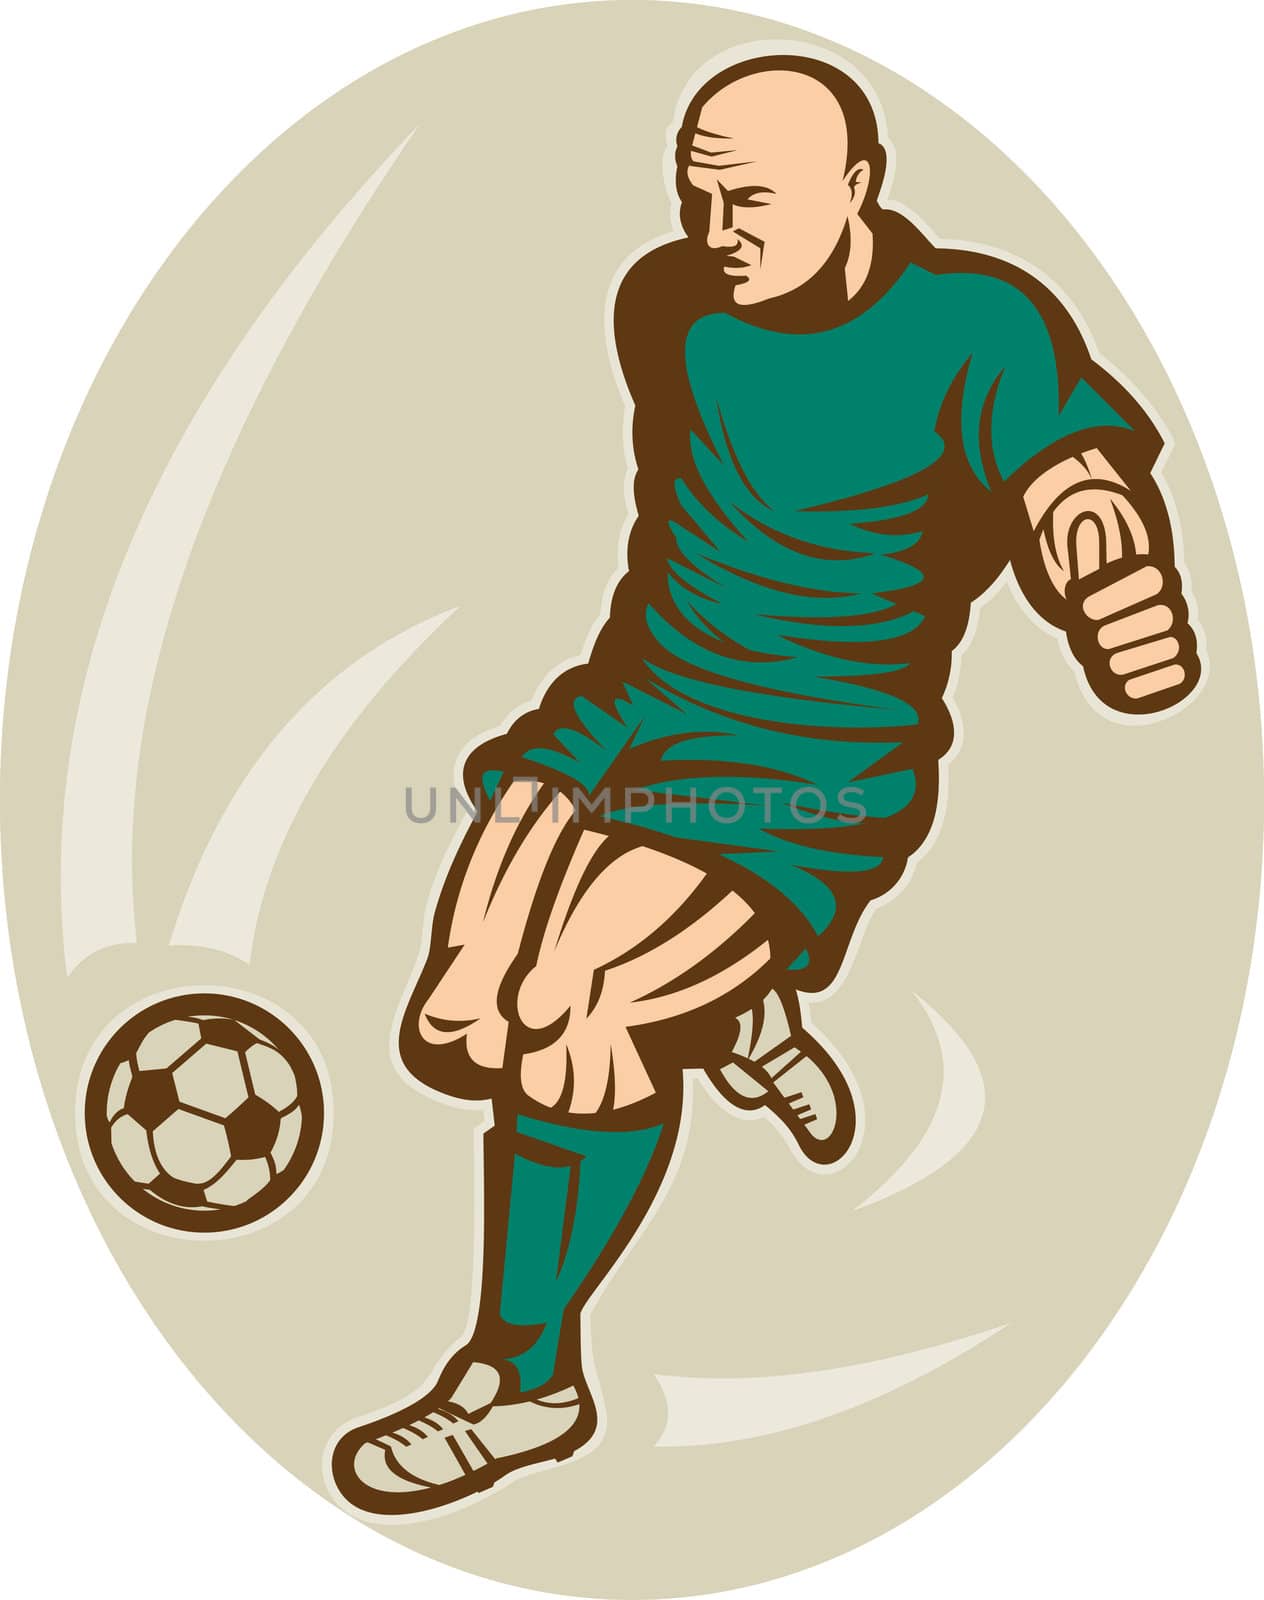 illustration of a Soccer player kicking the ball viewed from the front